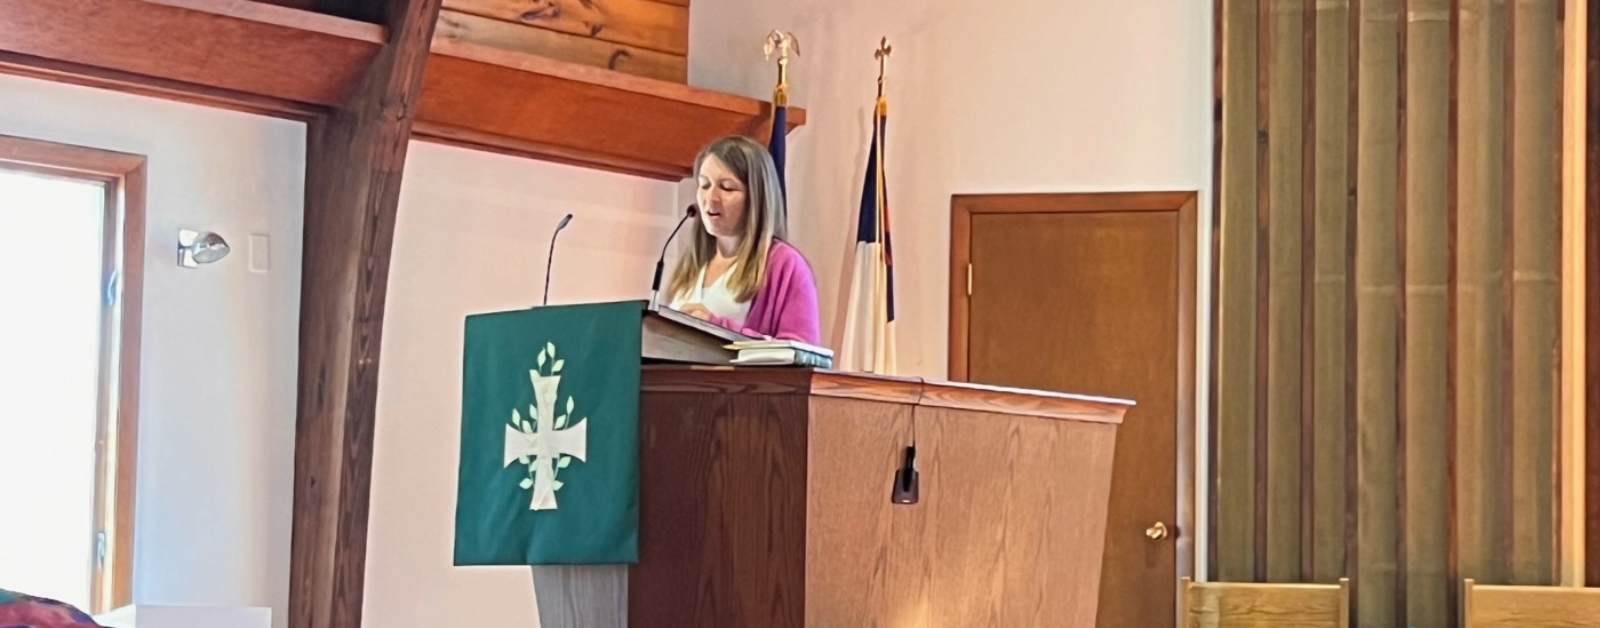 Amy Julia stands in the pulpit and preaches